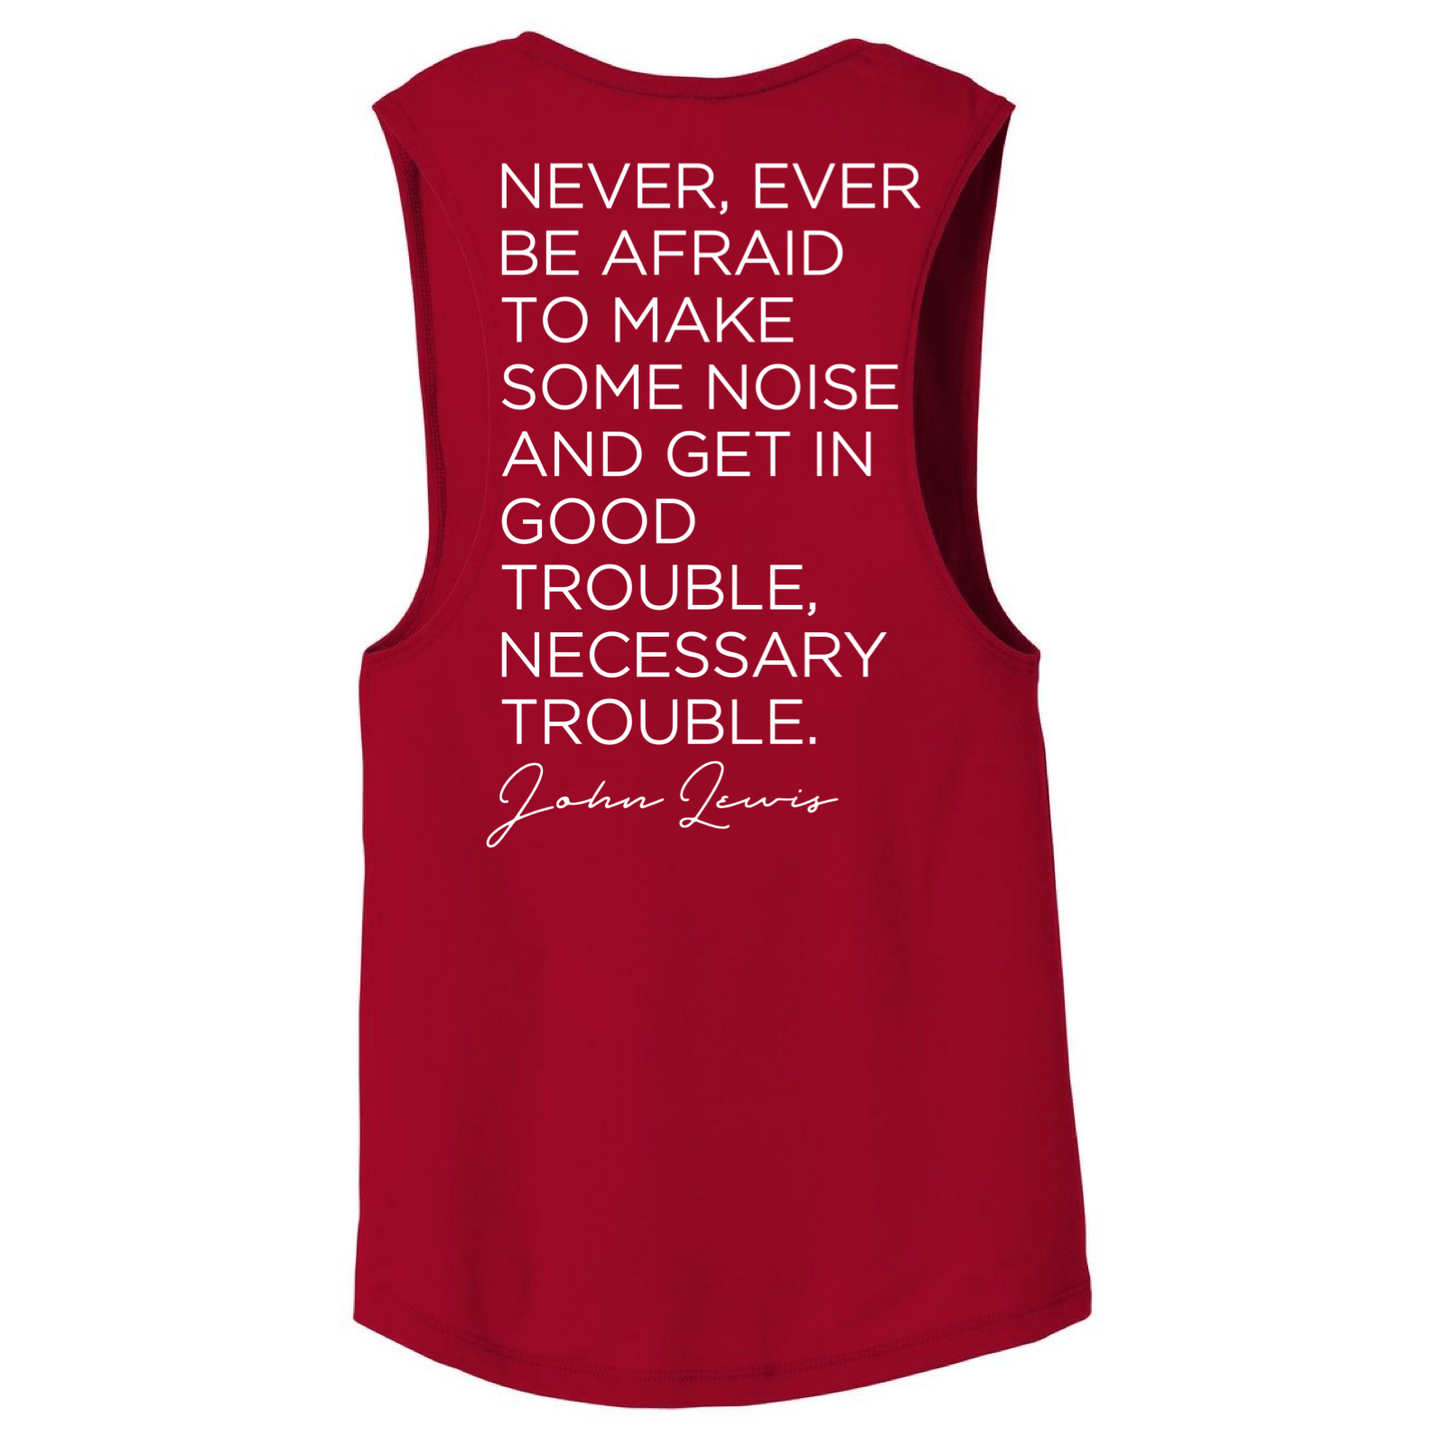 Trouble Maker Muscle Tank - Never ever be afraid to make some noise and get in good trouble necessary trouble